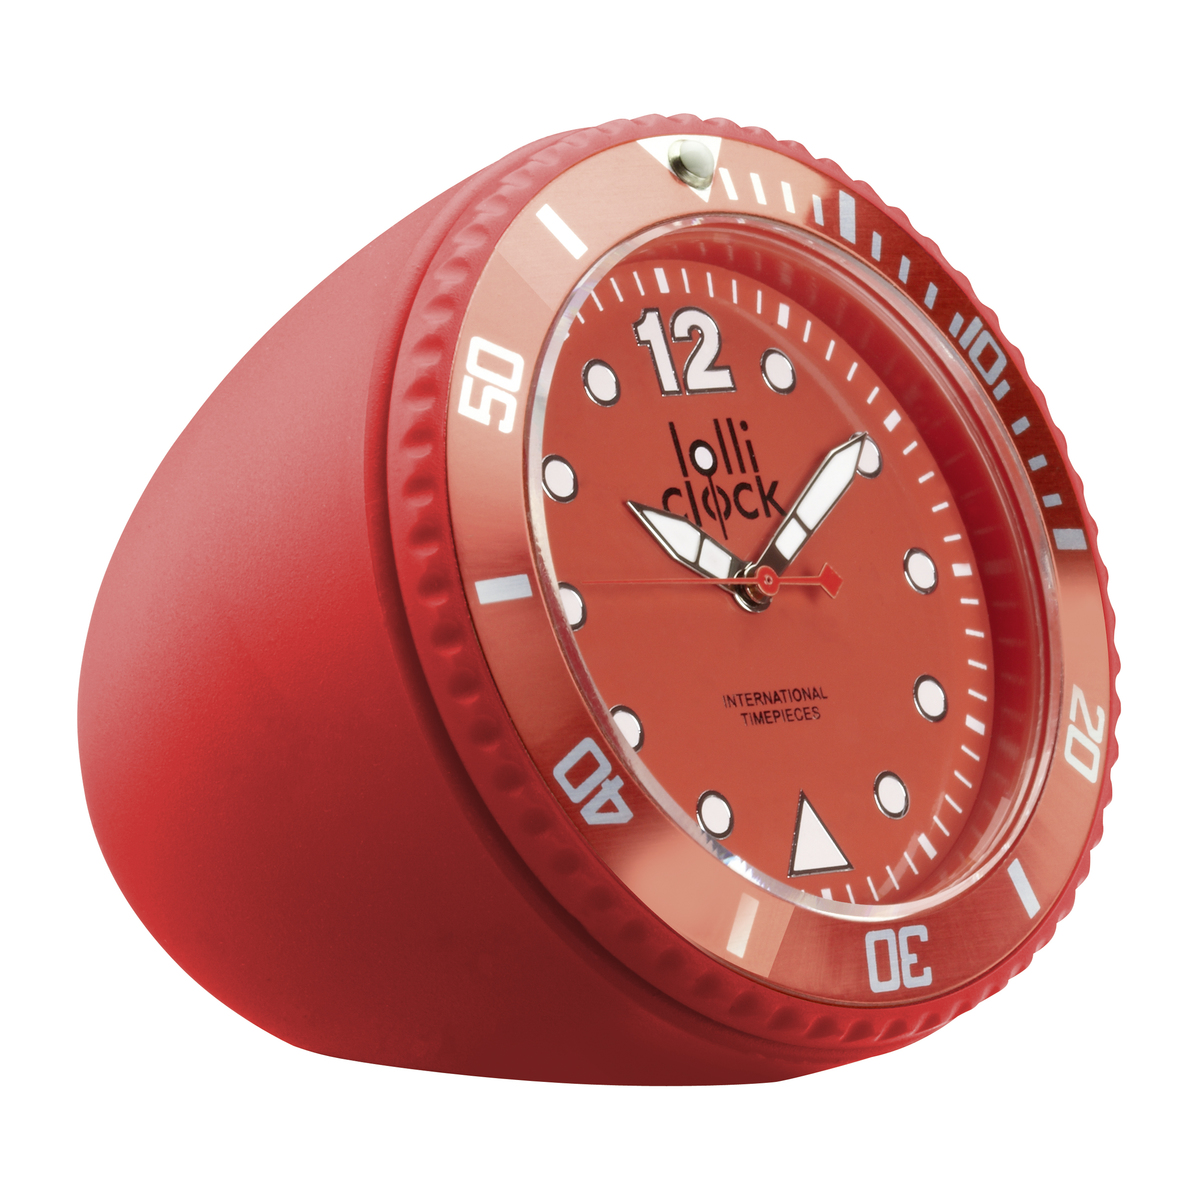 LM Uhr LOLLICLOCK-ROCK RED rot